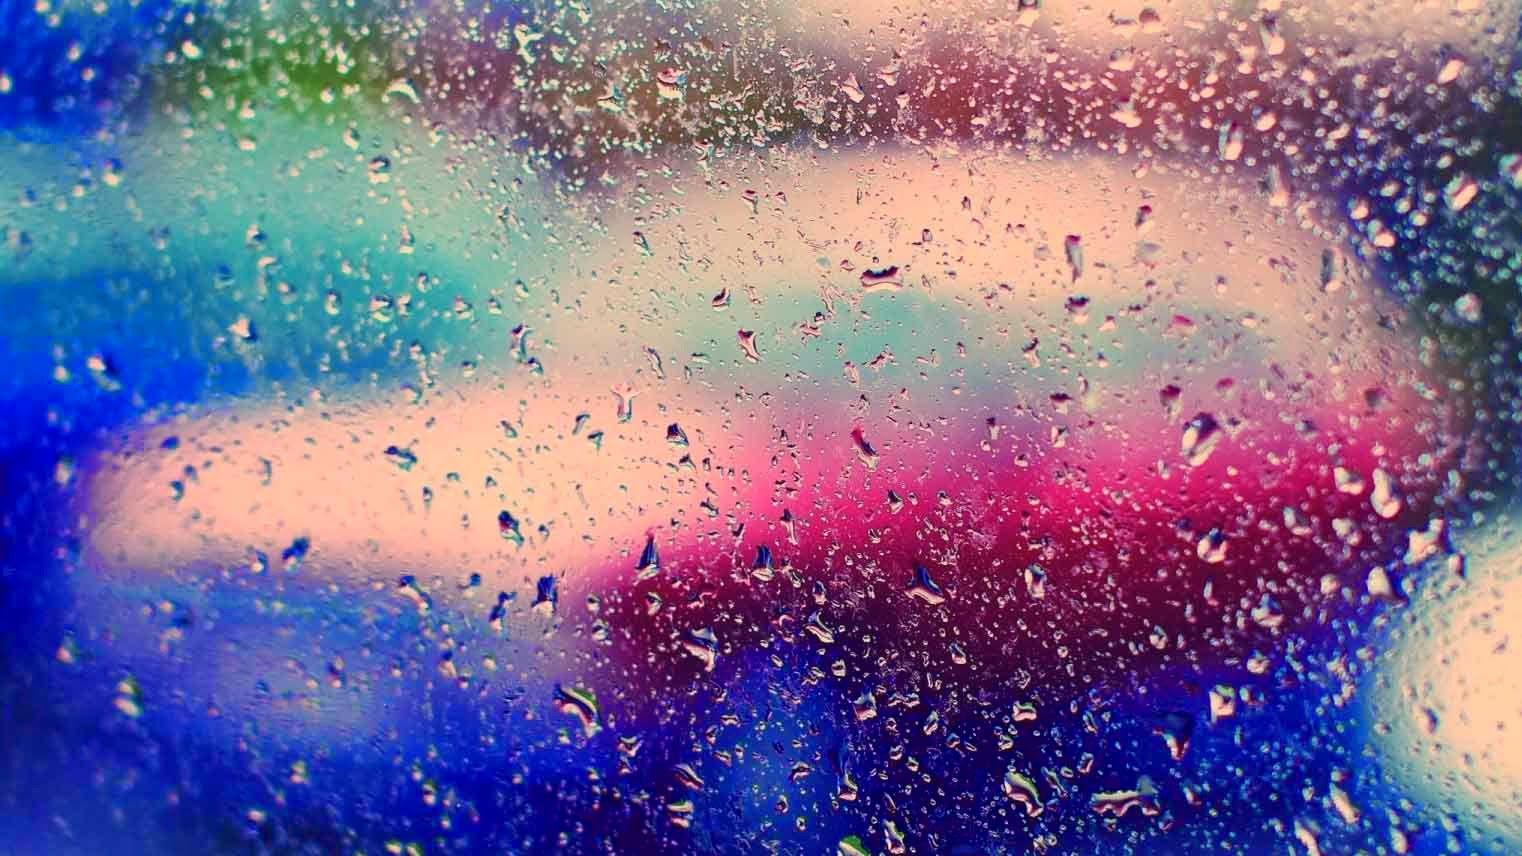 Top 28 Raindrops HD Wallpapers for Your Desktop | Tinydesignr